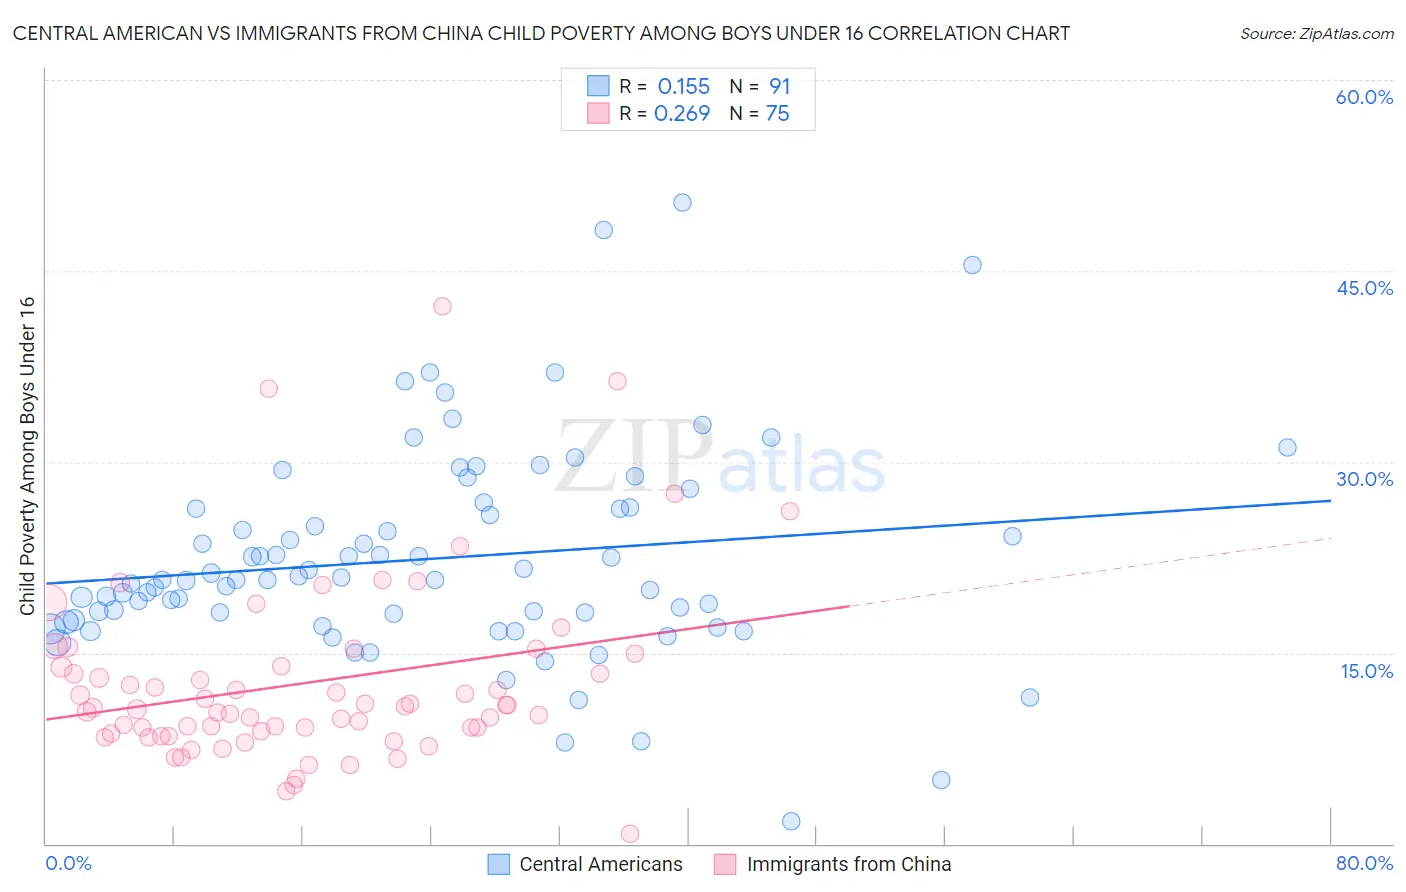 Central American vs Immigrants from China Child Poverty Among Boys Under 16